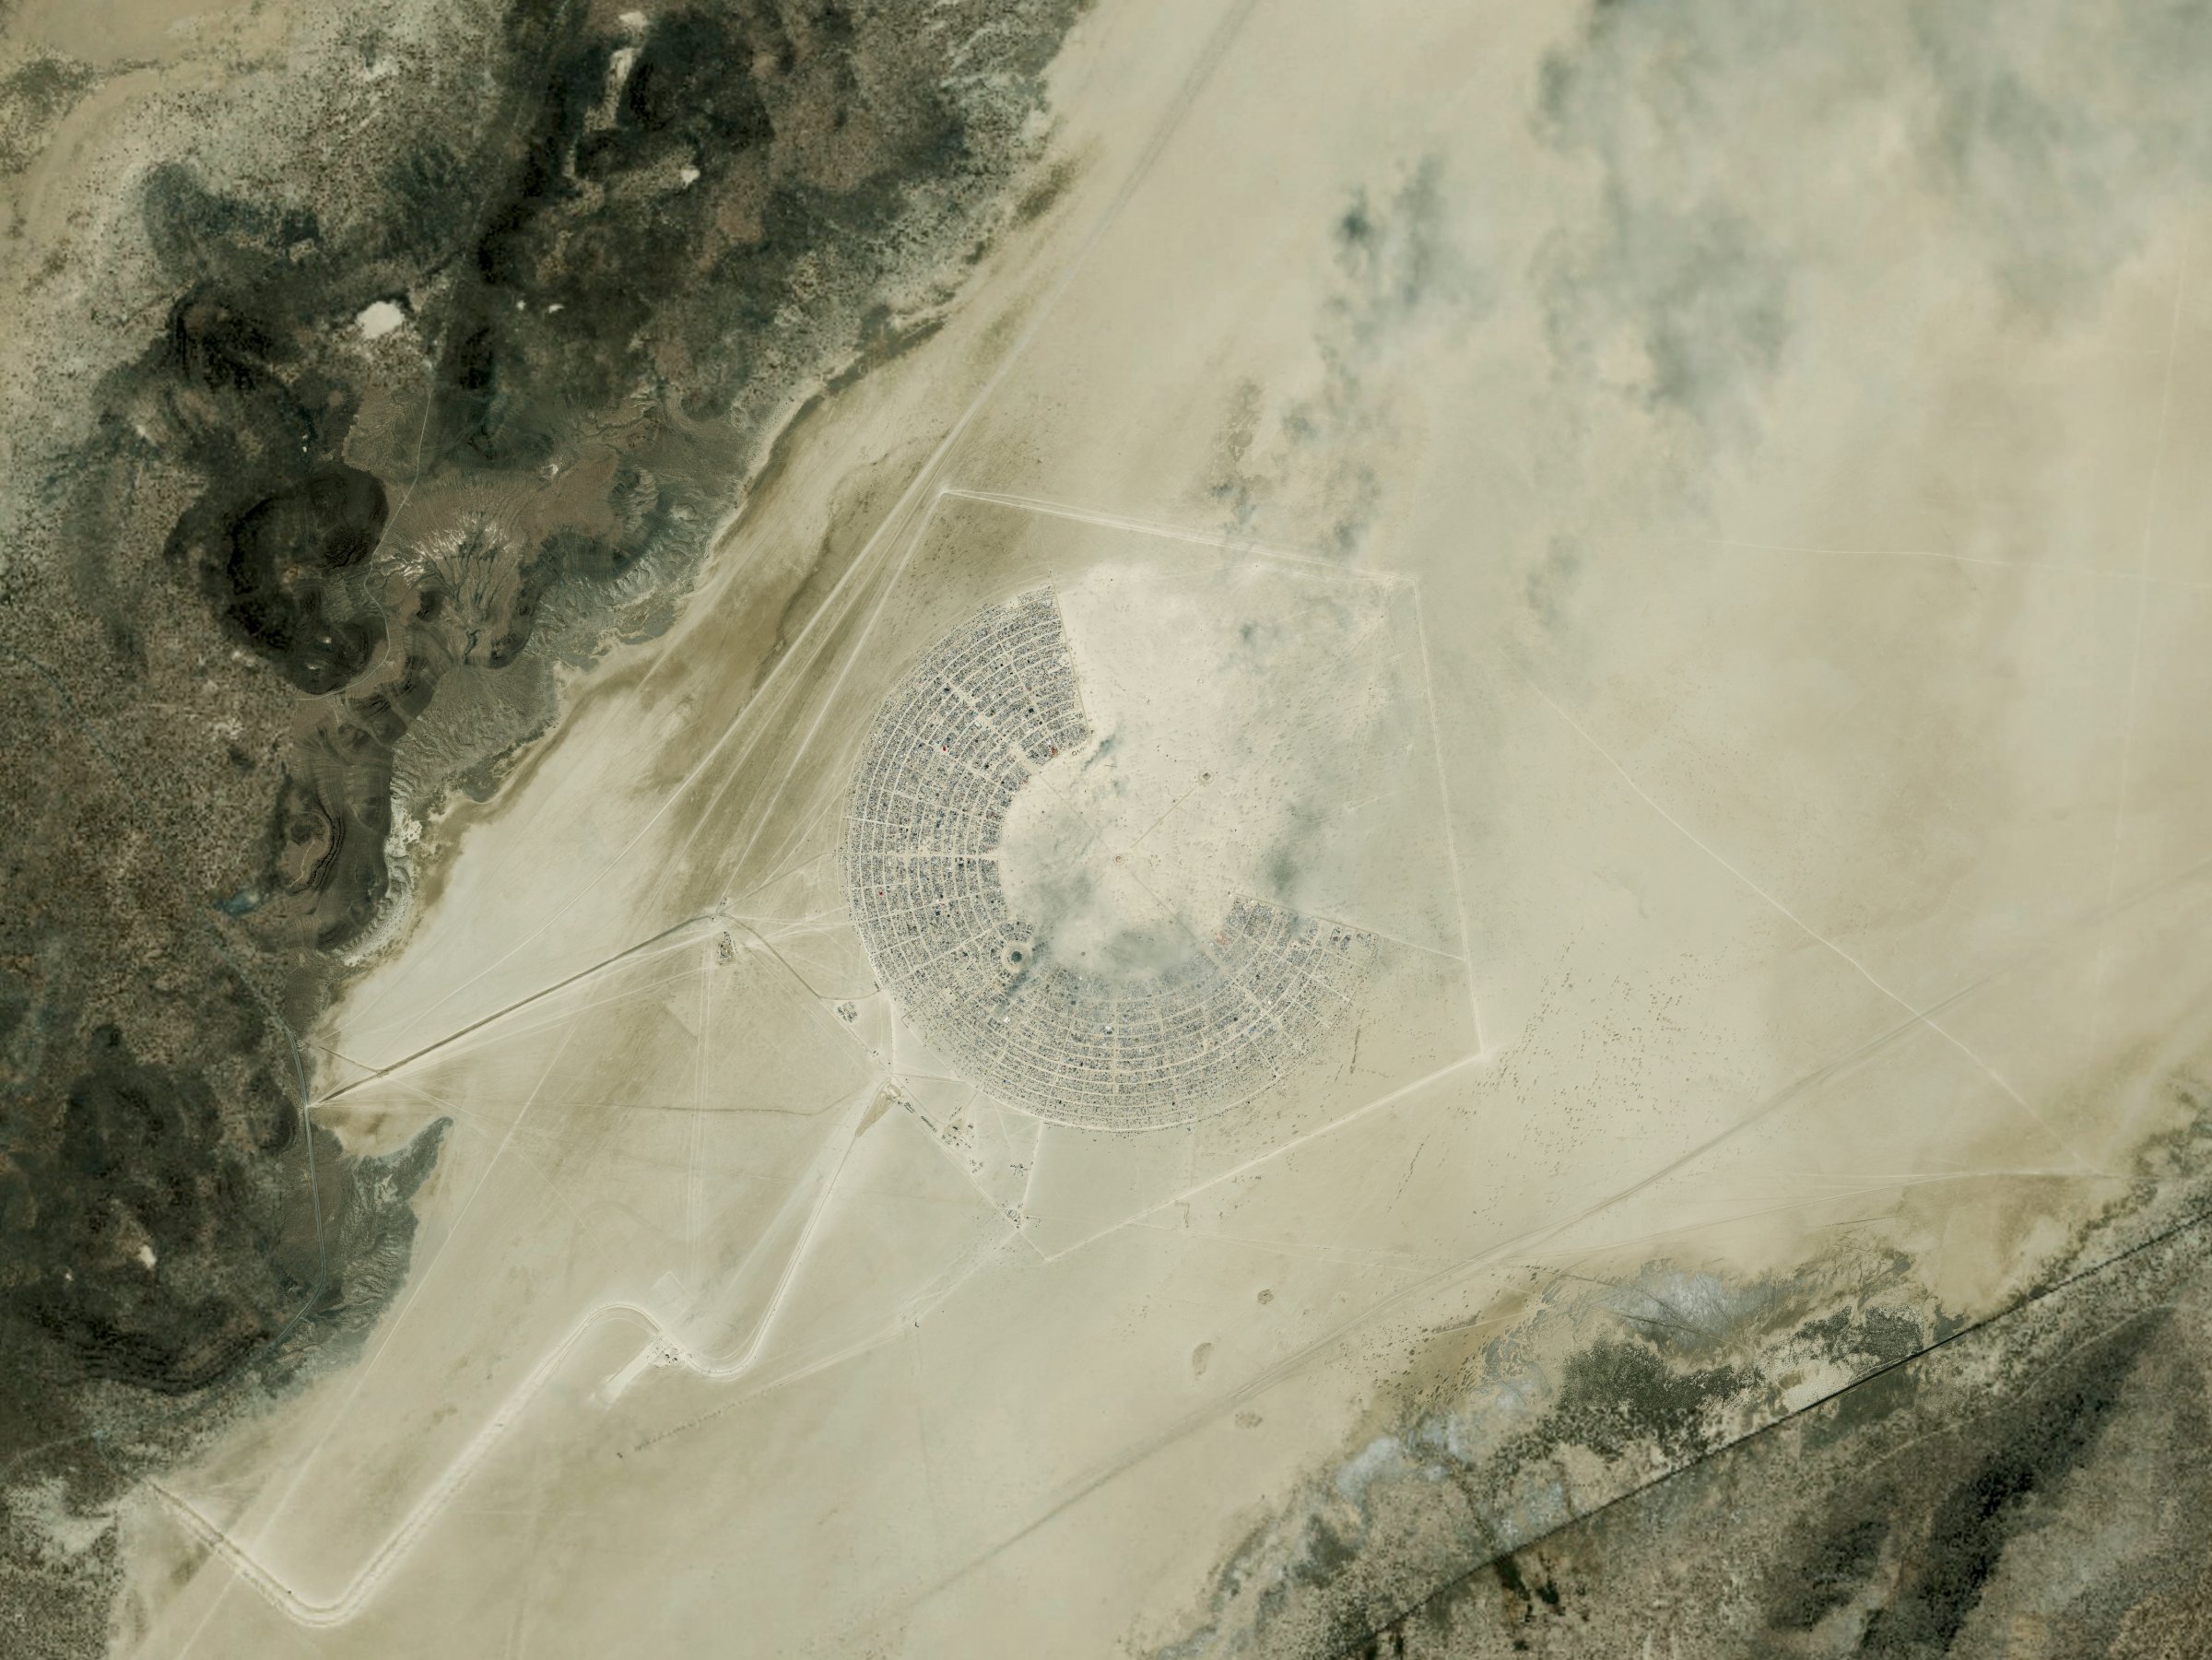 This is a DigitalGlobe satellite image "overview" of the Burning Man Festival in Black Rock City Nevada.